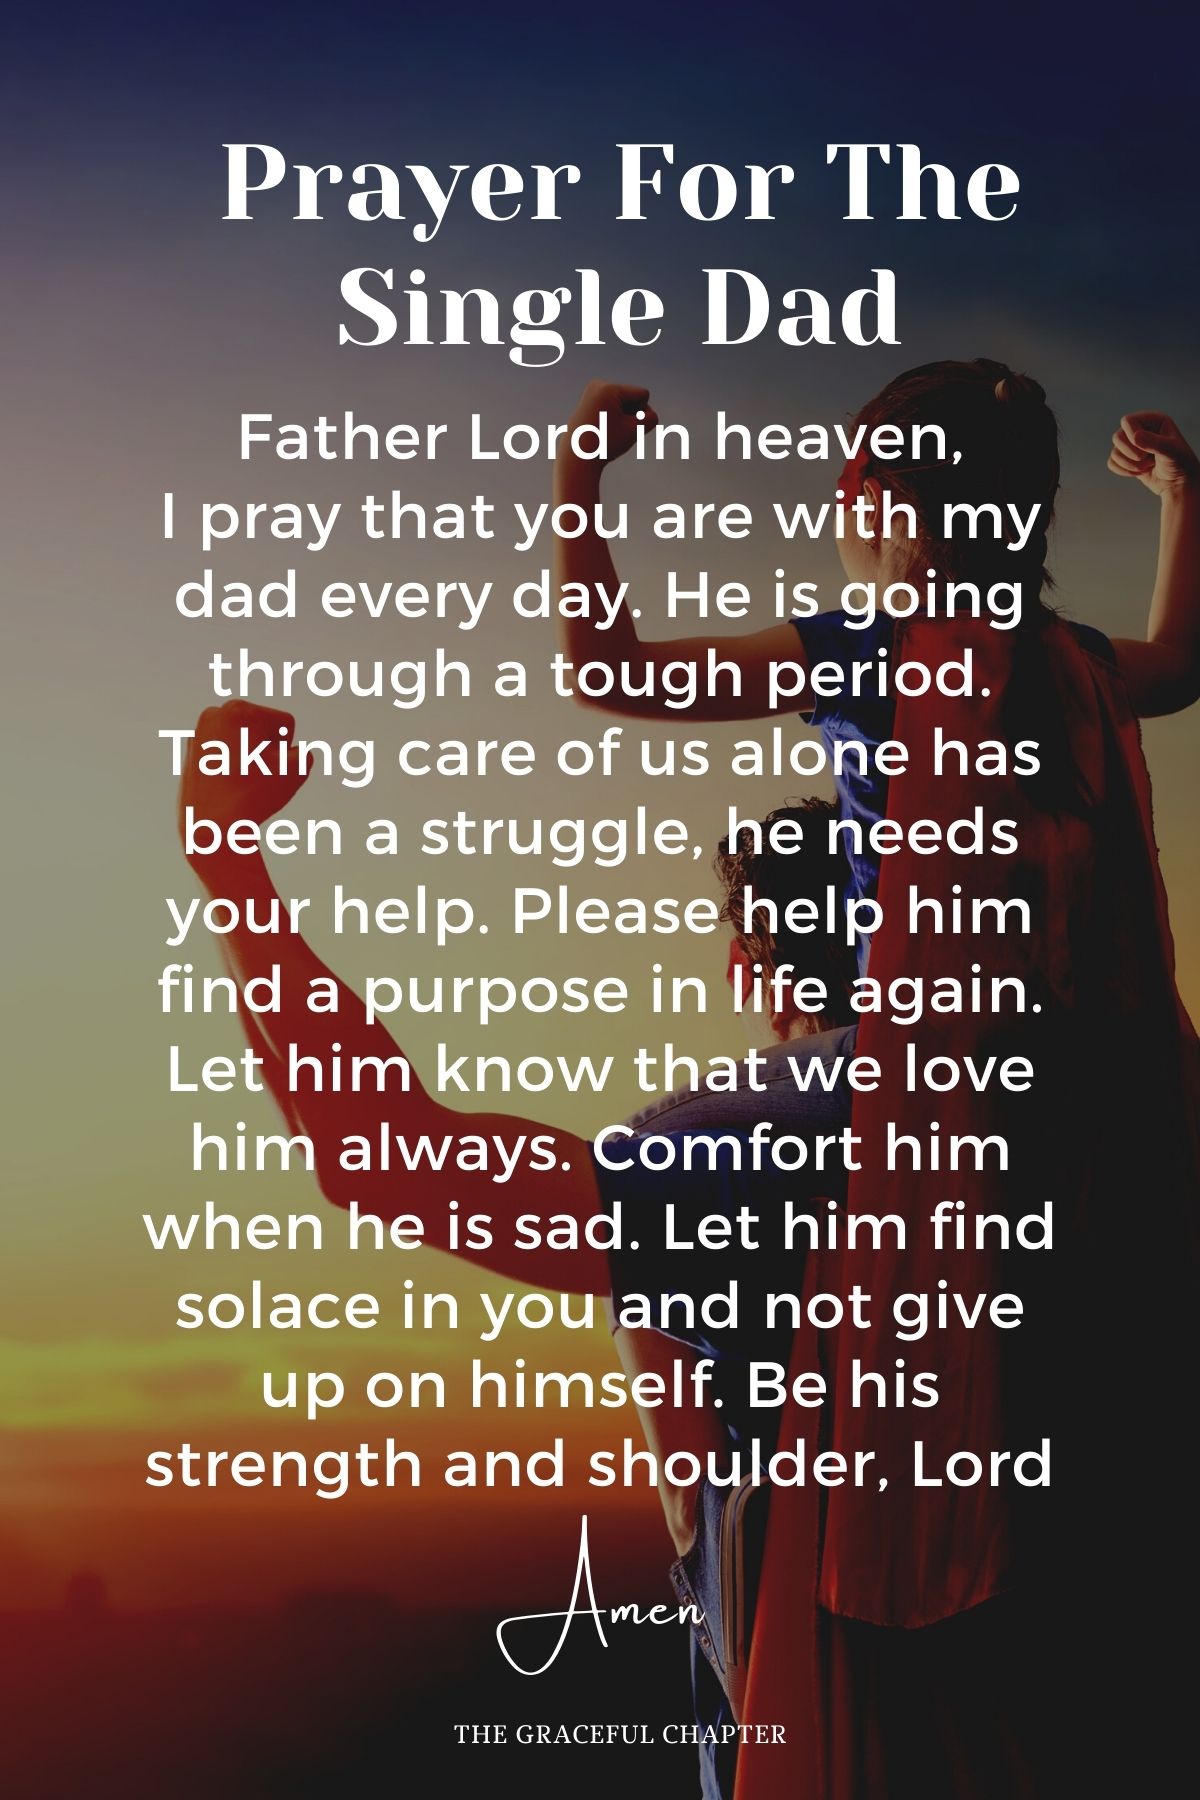 Prayer for the single dad